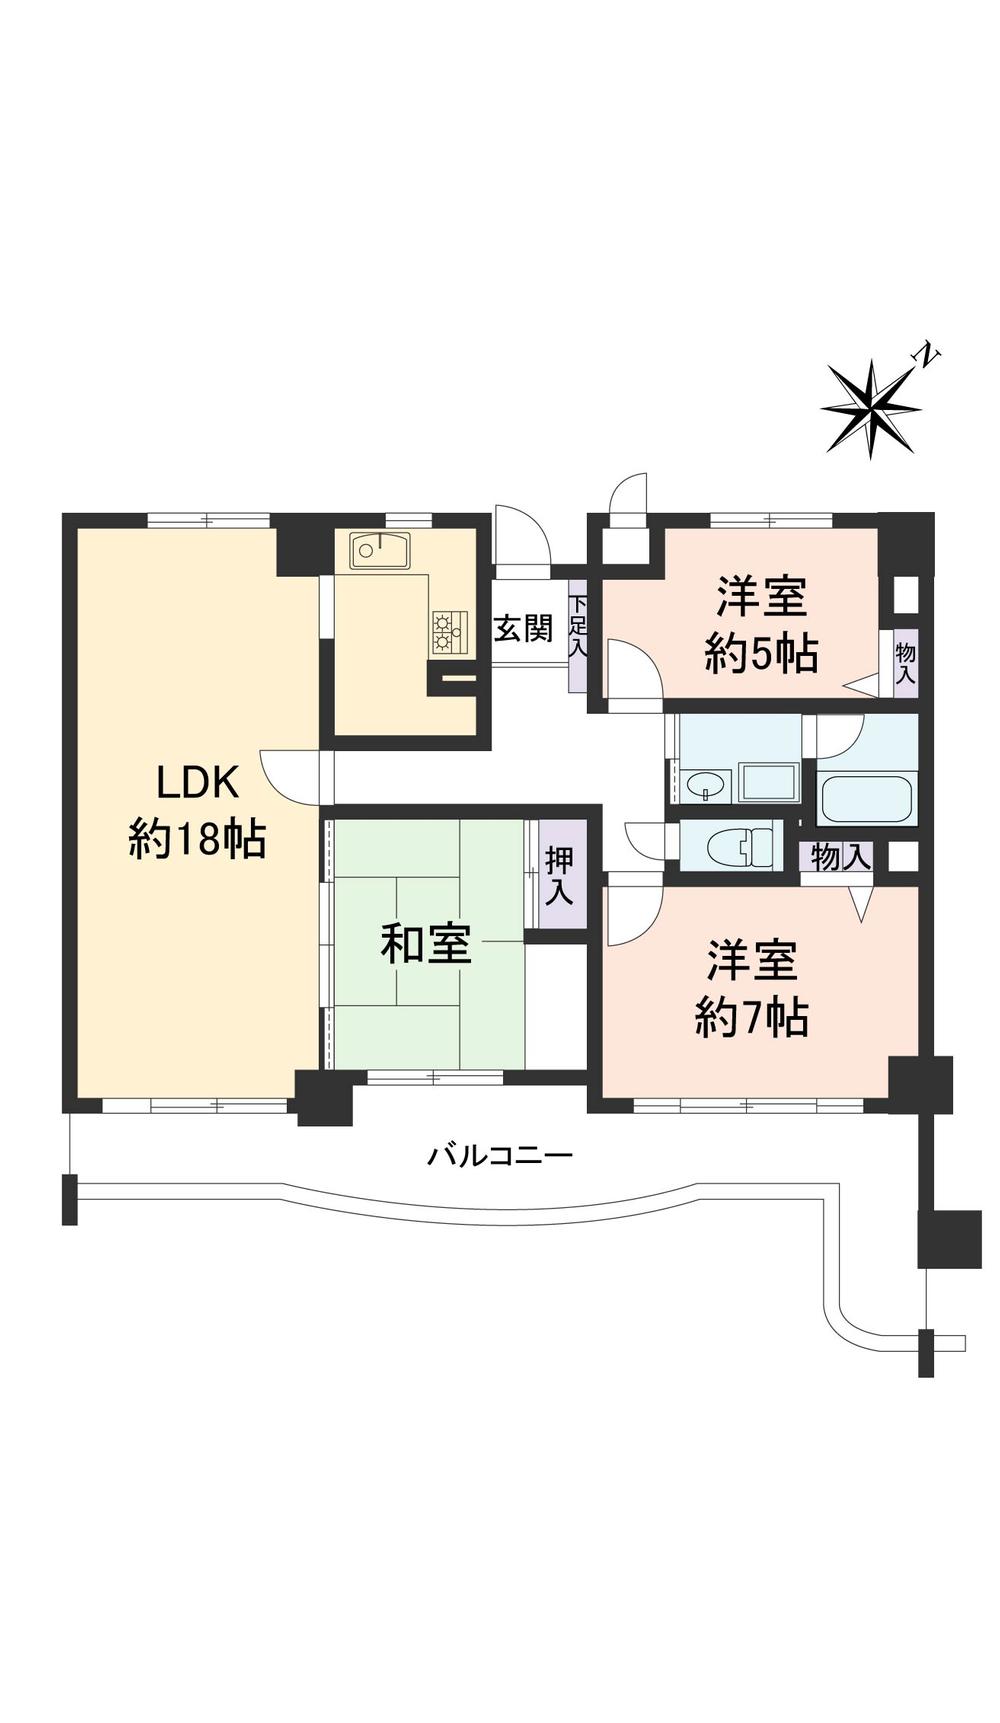 Floor plan. 3LDK, Price 7.3 million yen, Occupied area 83.76 sq m , Balcony area 17.44 sq m is 3LDK of southeast-facing balcony ^^ ○ LDK 18.0 Pledge Optimal Western-style 7.0 Pledge ○ to main bedroom ○ alcove ・ A Japanese-style room 6.0 quires of the closet Privacy can be ensured even if there is a visitor because the independent kitchen